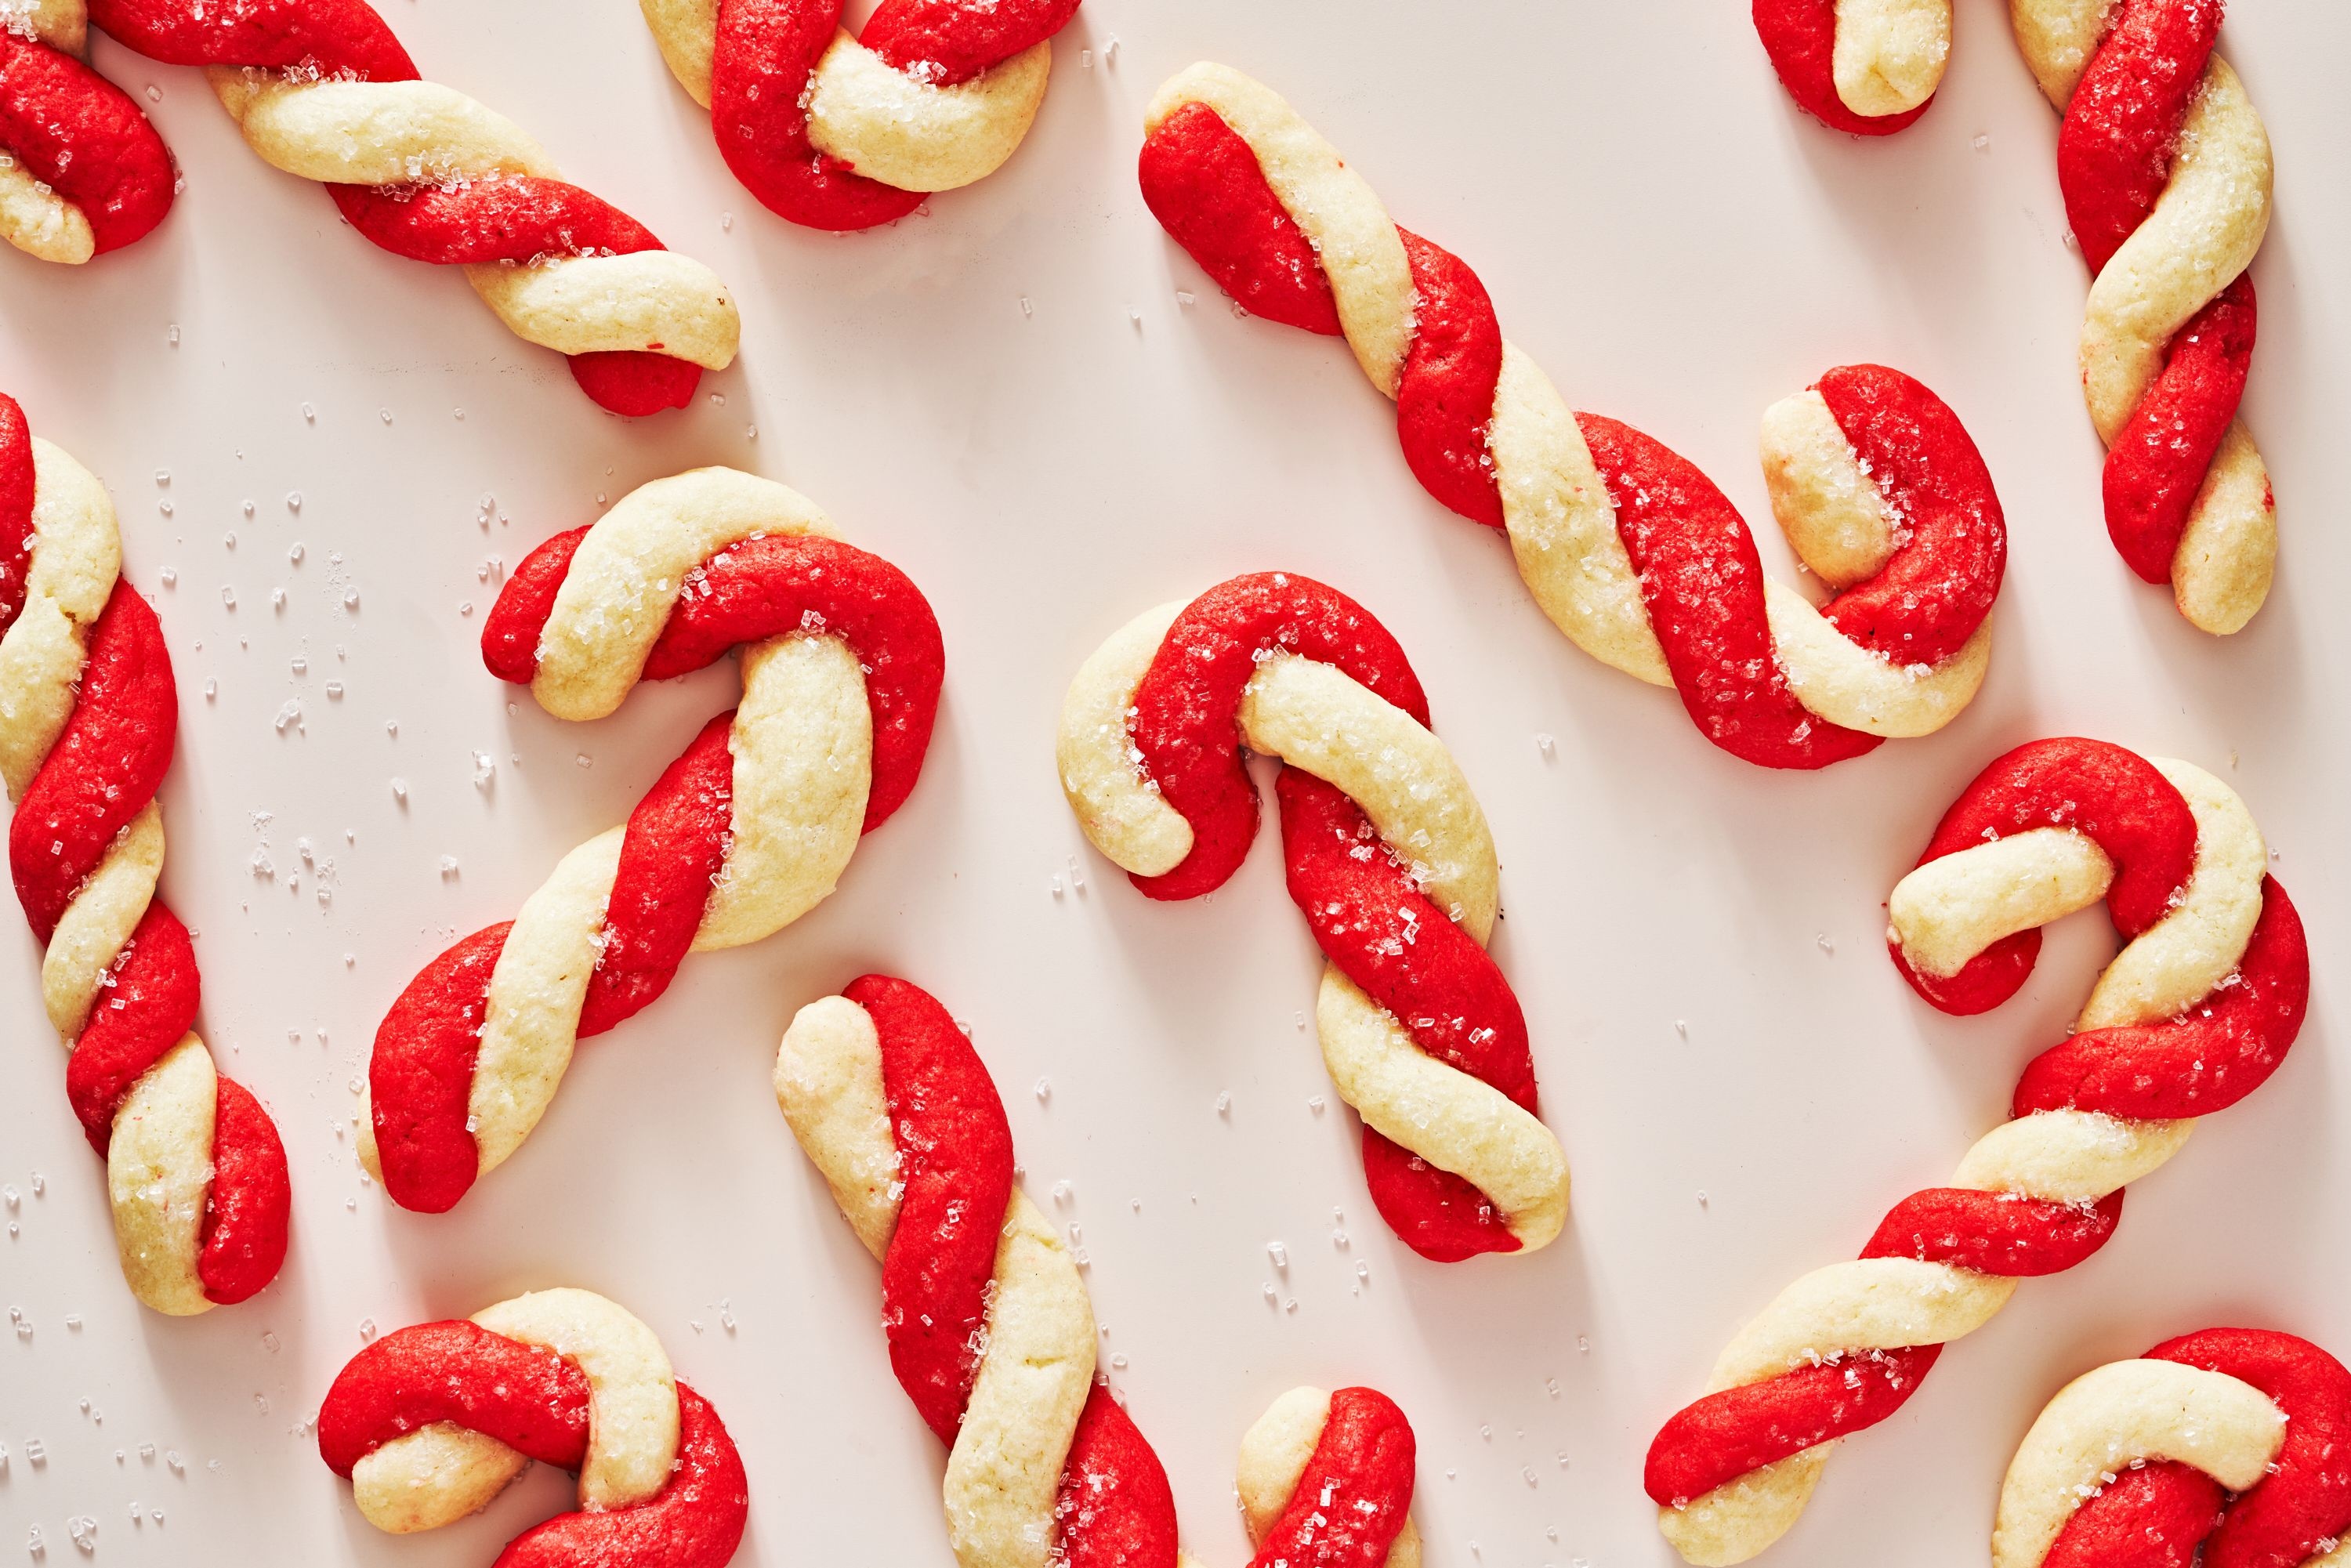 Candy cane cookies, Festive recipe, Holiday baking, Irresistible sweets, 3000x2010 HD Desktop